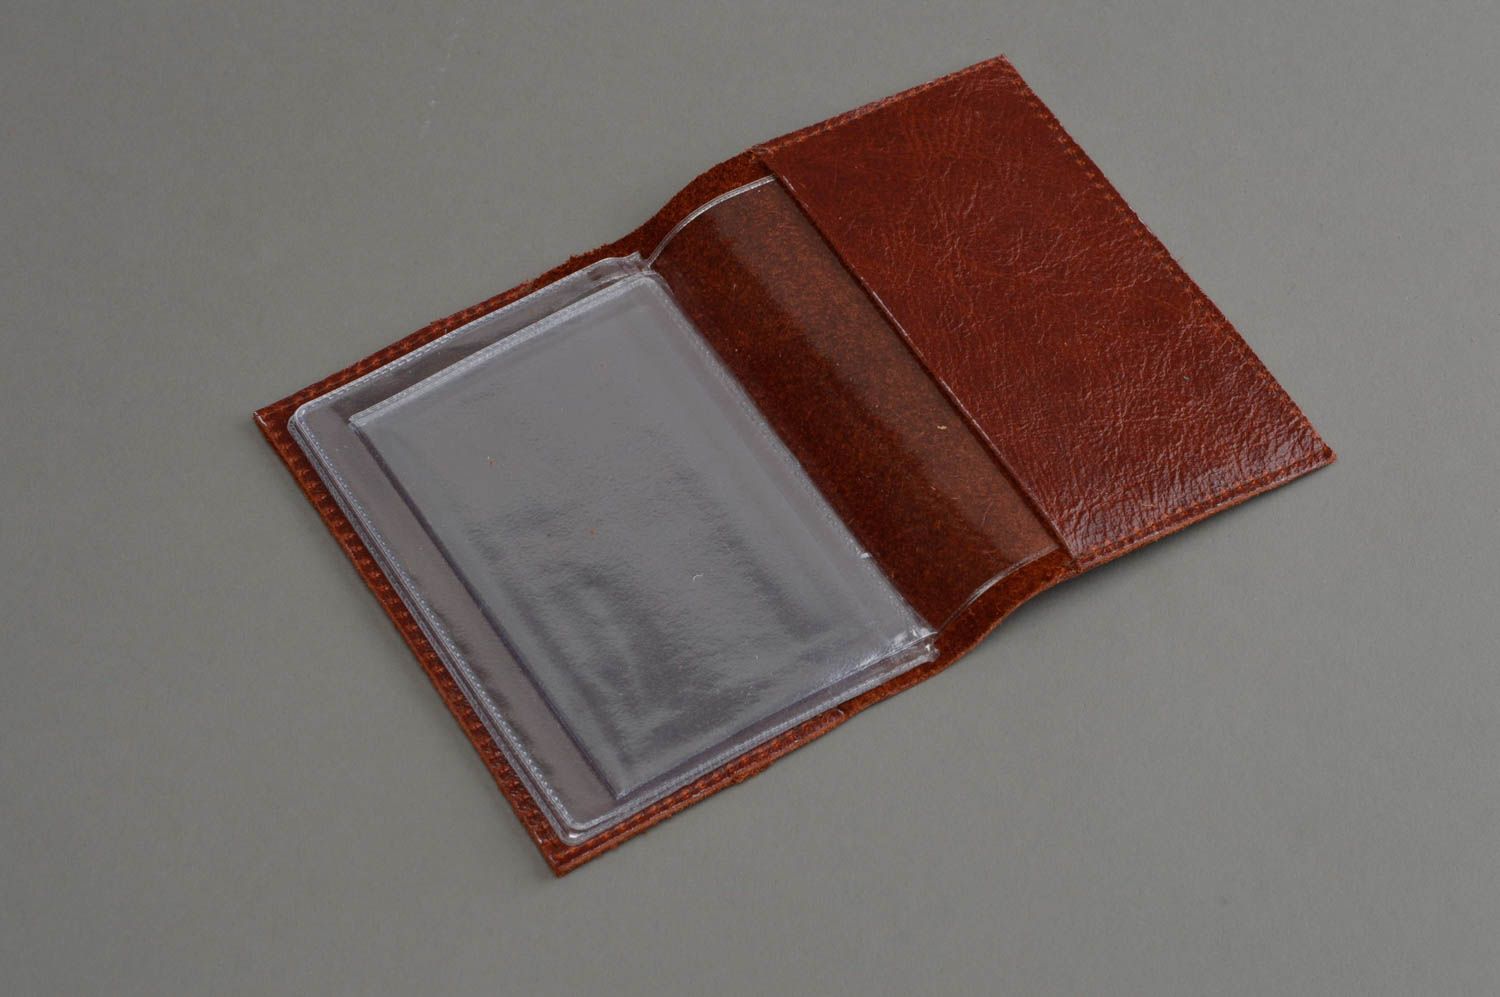 Stylish handmade leather driving licence cover fashion accessories gift ideas photo 3